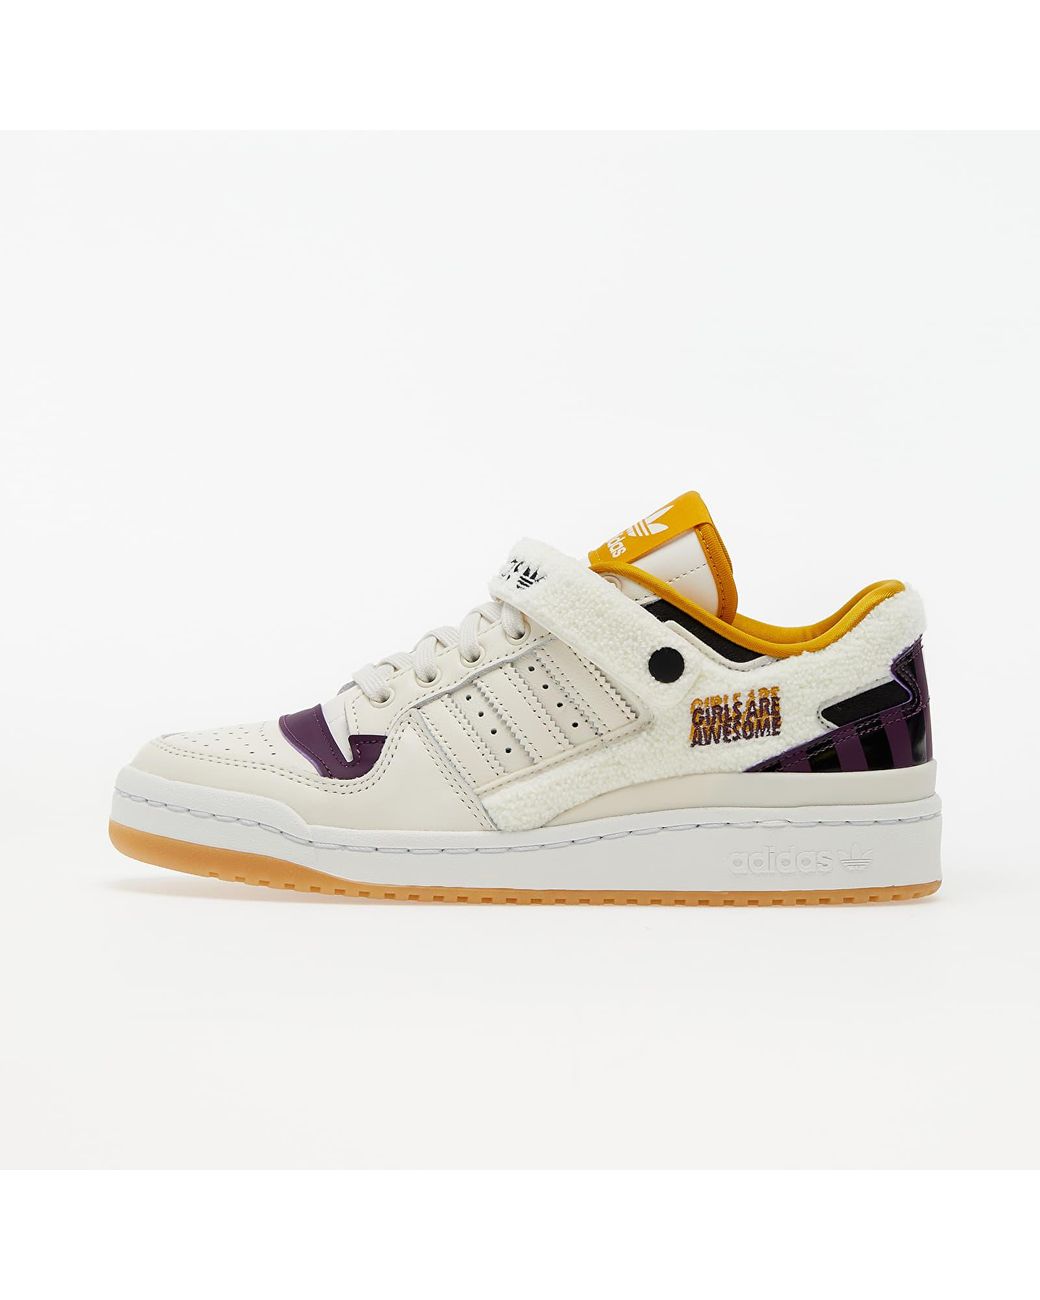 Adidas Forum Low W Girls Are Awesome Chalk White/ Core Black/ Purple Beauty  adidas Originals | Lyst